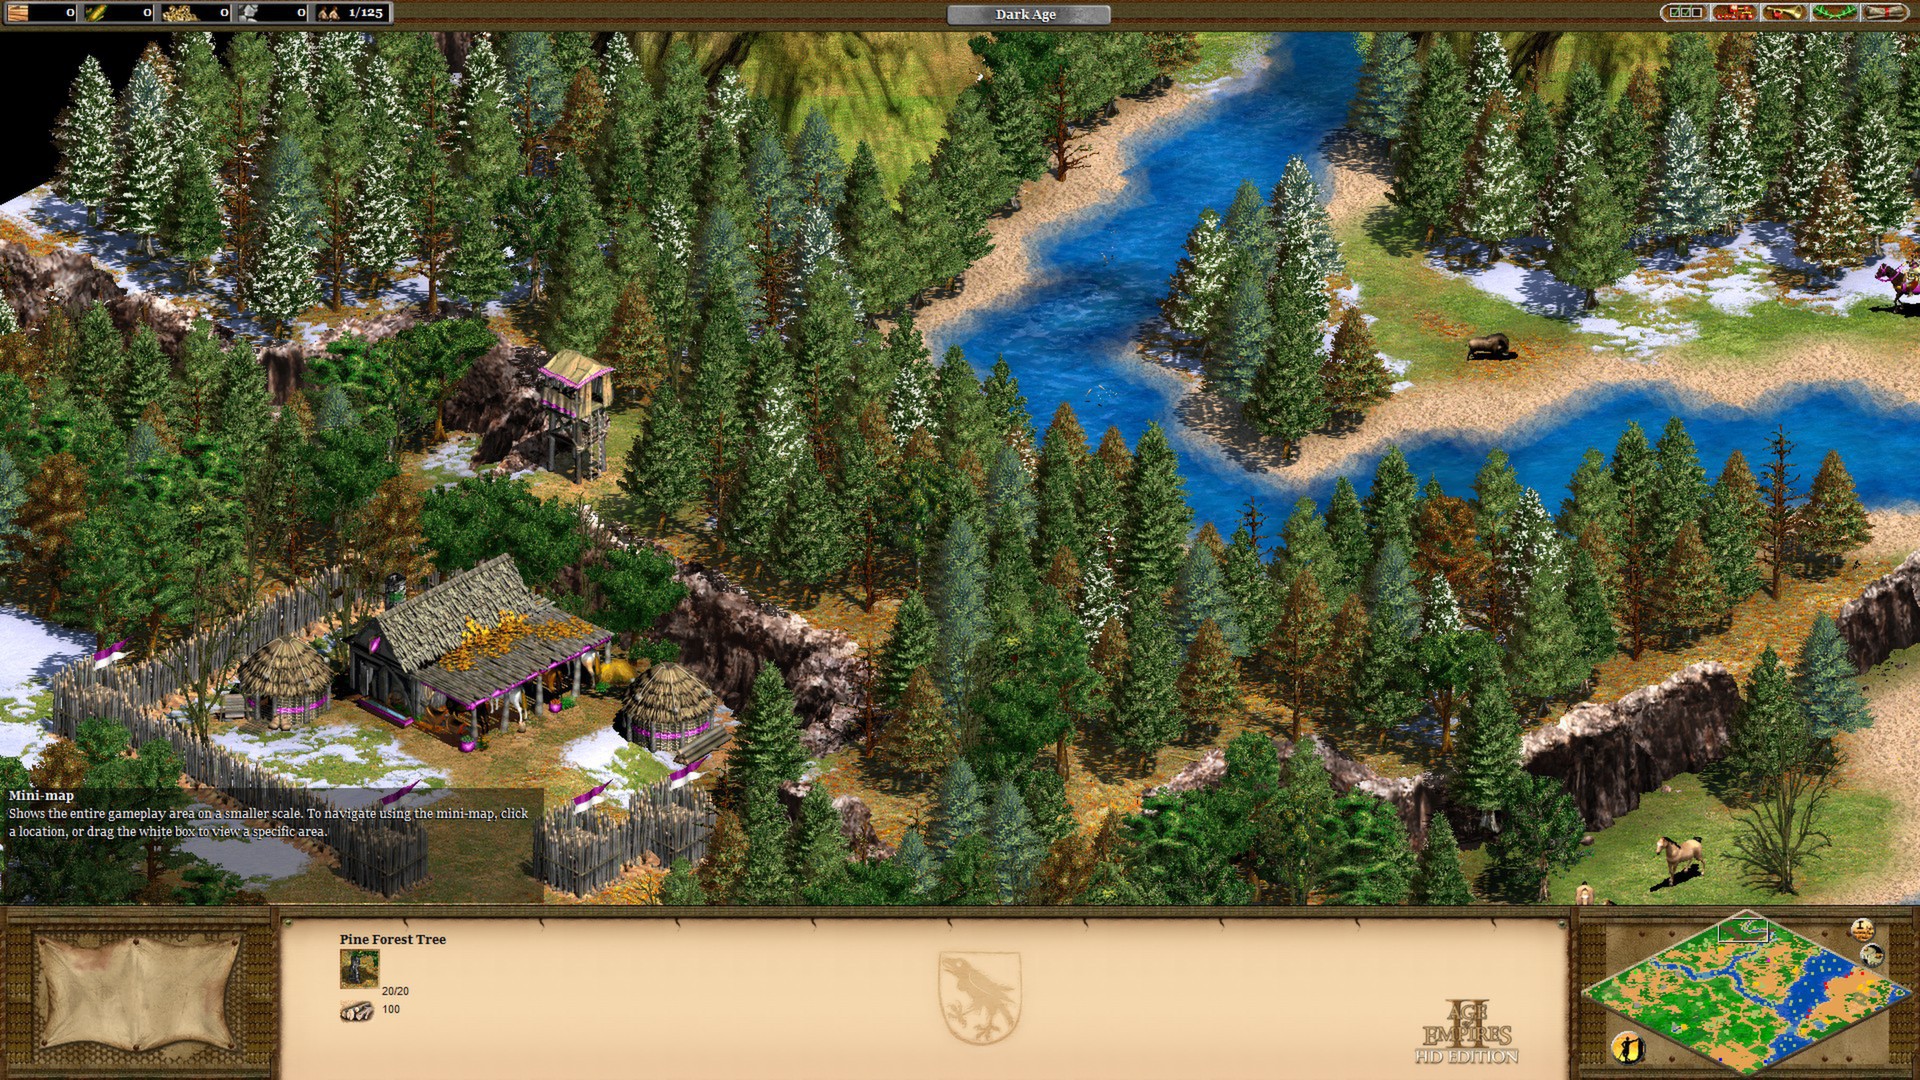 age of empires 2 full download free version